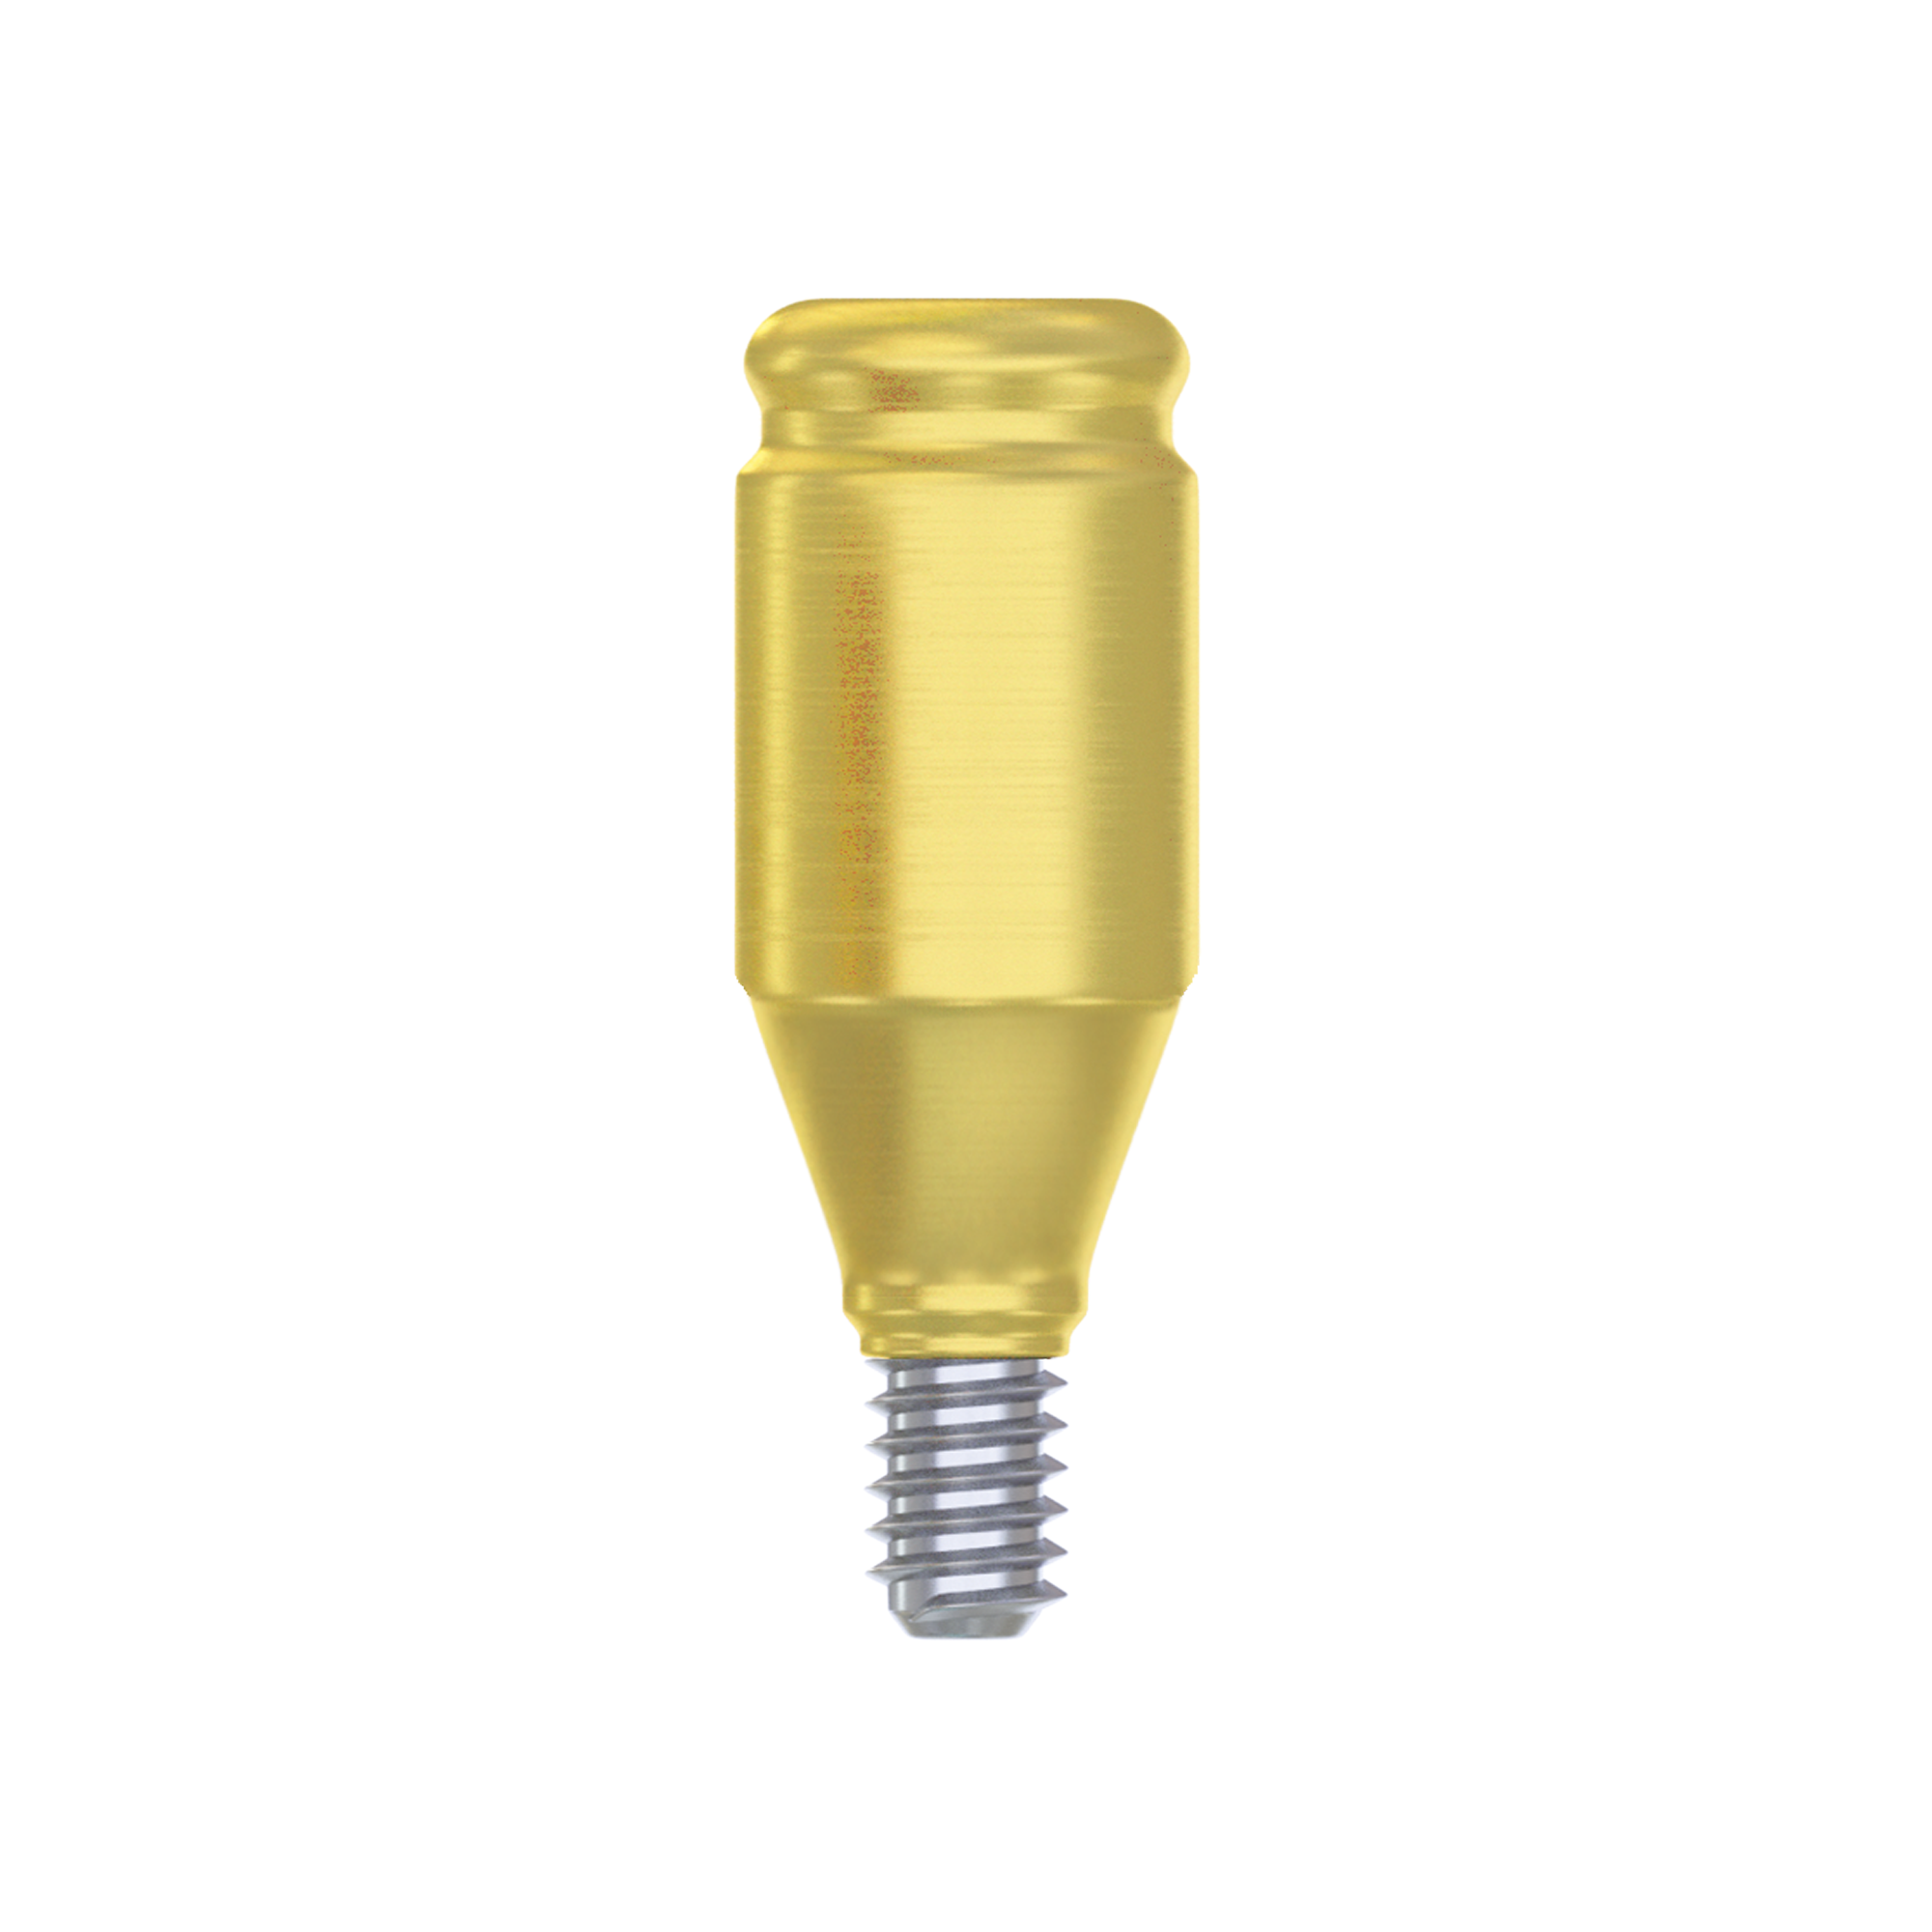 DSI Straight Loc-in Abutment 3.75mm FULL SET - Conical Connection RP Ø4.3-5.0mm